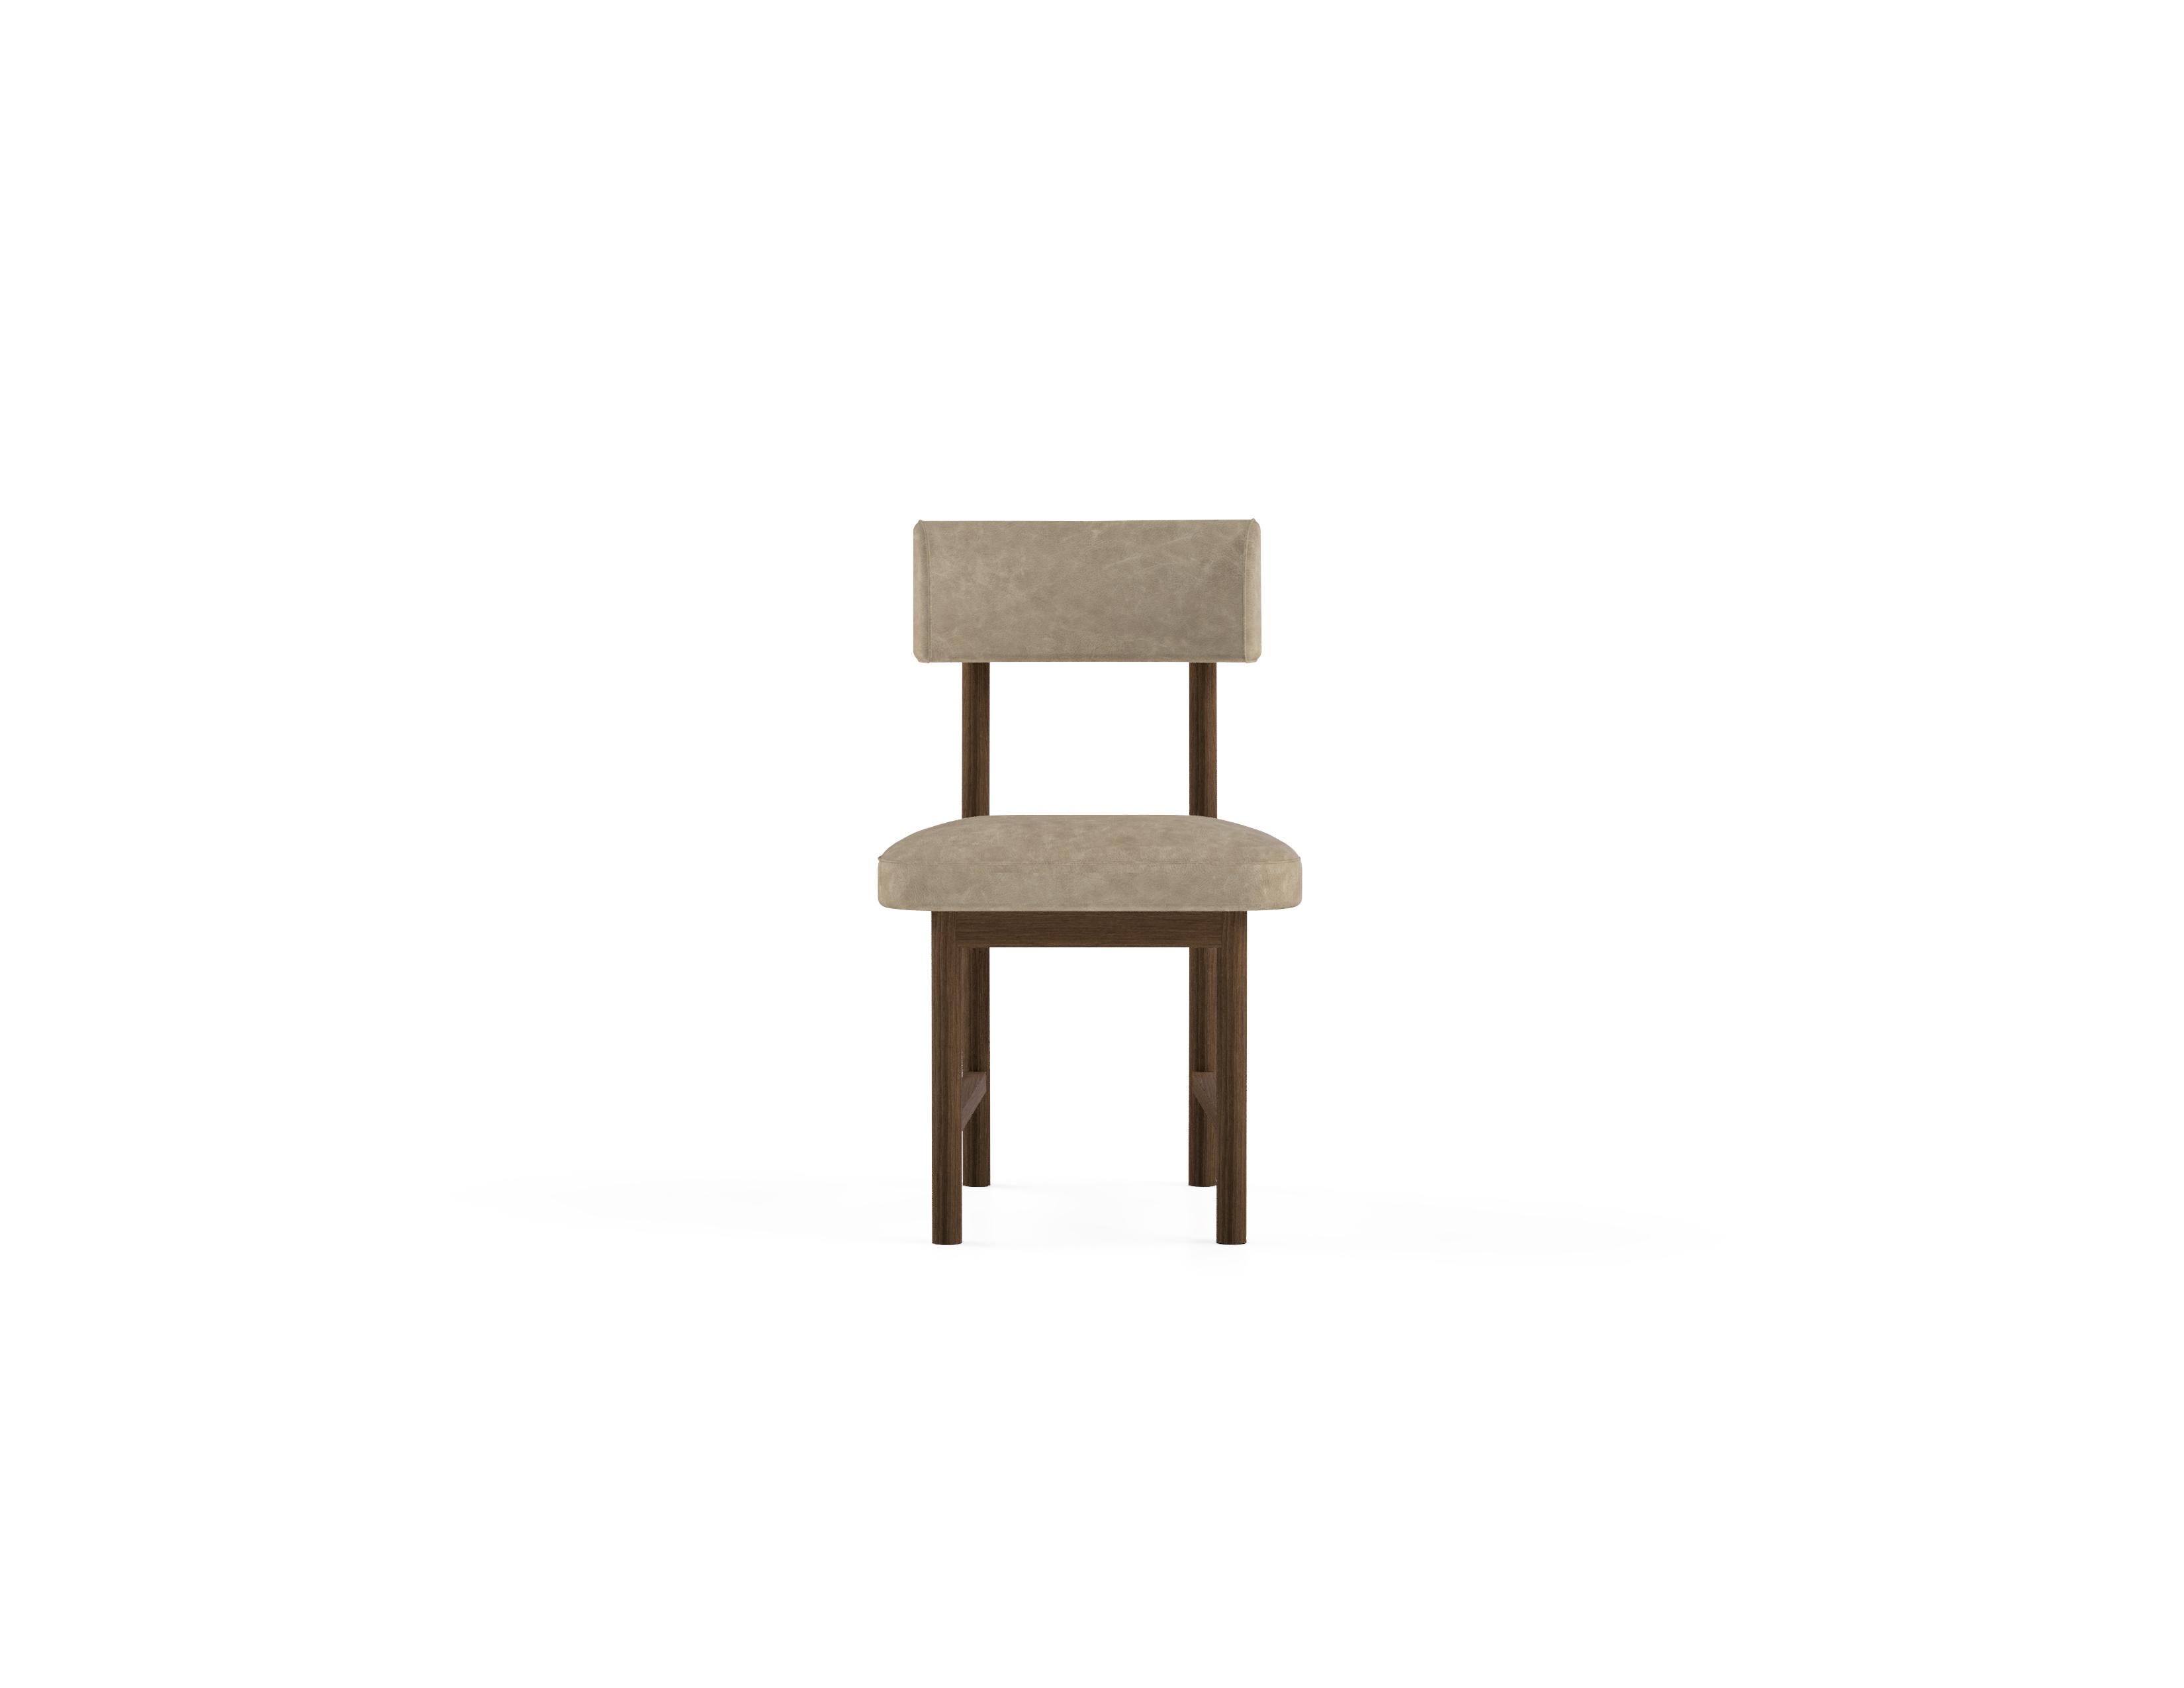 ‘The Kanat Dining Chair’ is simple yet elaborate chair that stands out with its elegant stance, fine details and comfort. Stained beech wood frame is elevated with antique plated metal finish details and upholstery. 

Material & Finish 
Seat and